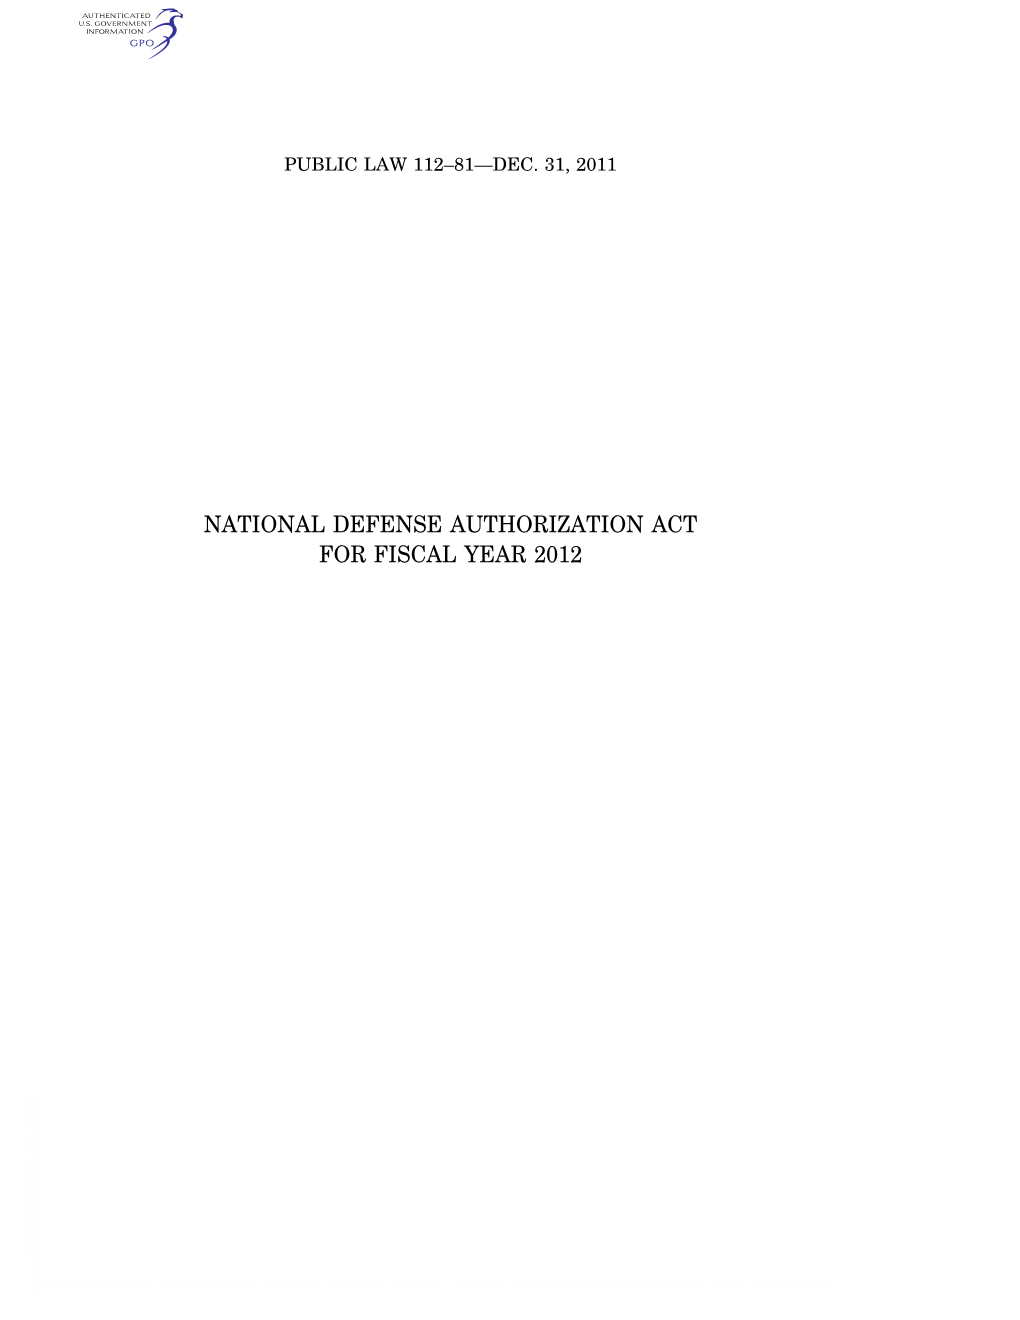 National Defense Authorization Act for Fiscal Year 2012